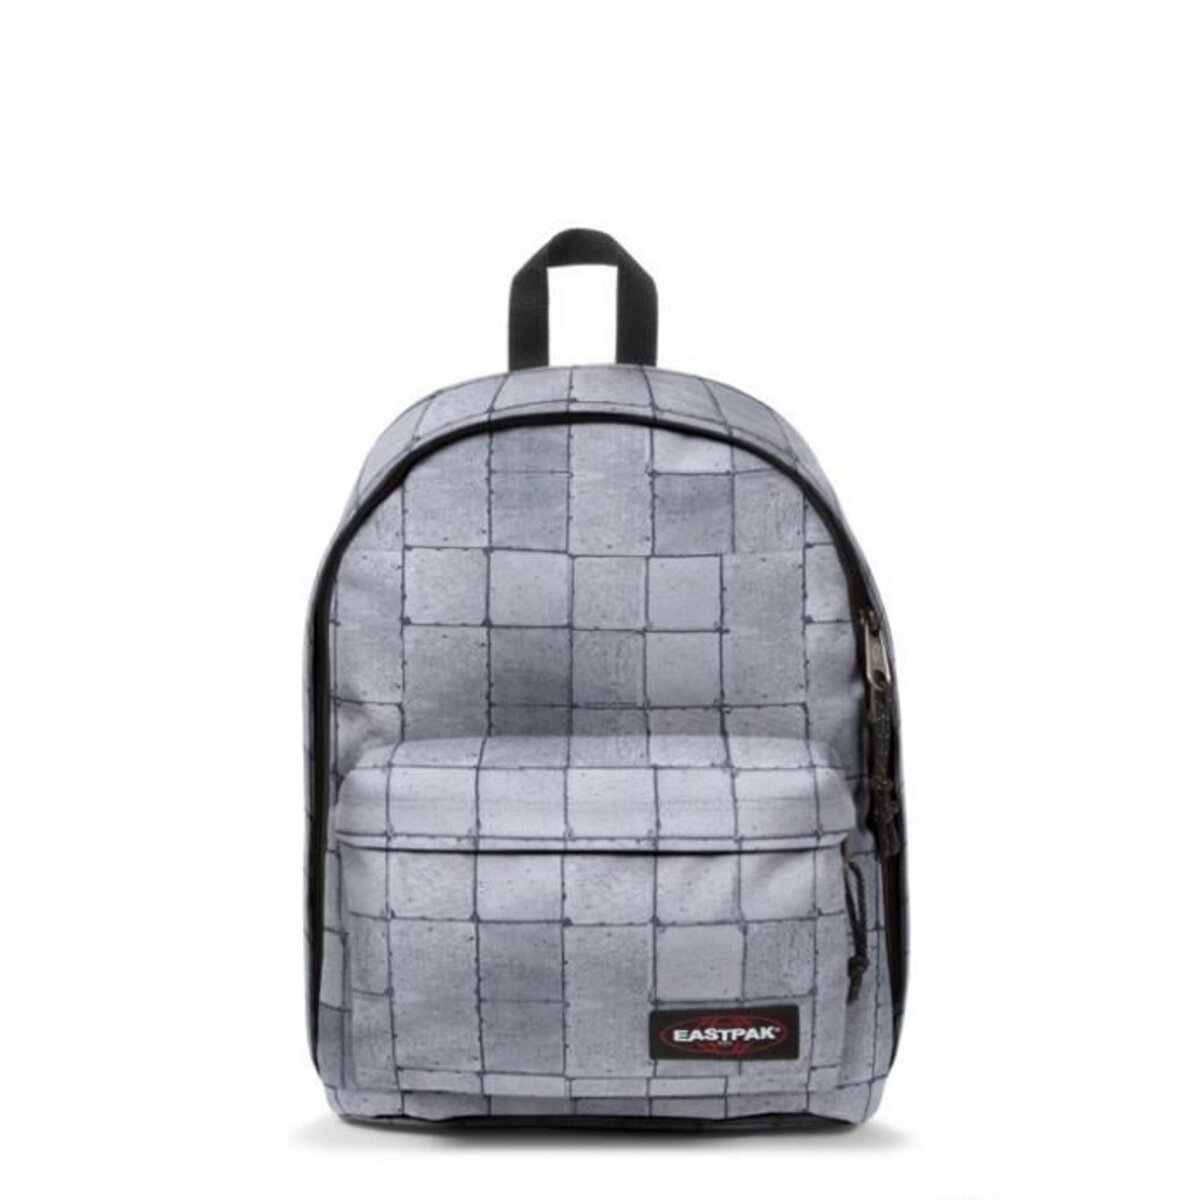 Sac à dos OUT OF OFFICE cracked white gris 2 compartiments